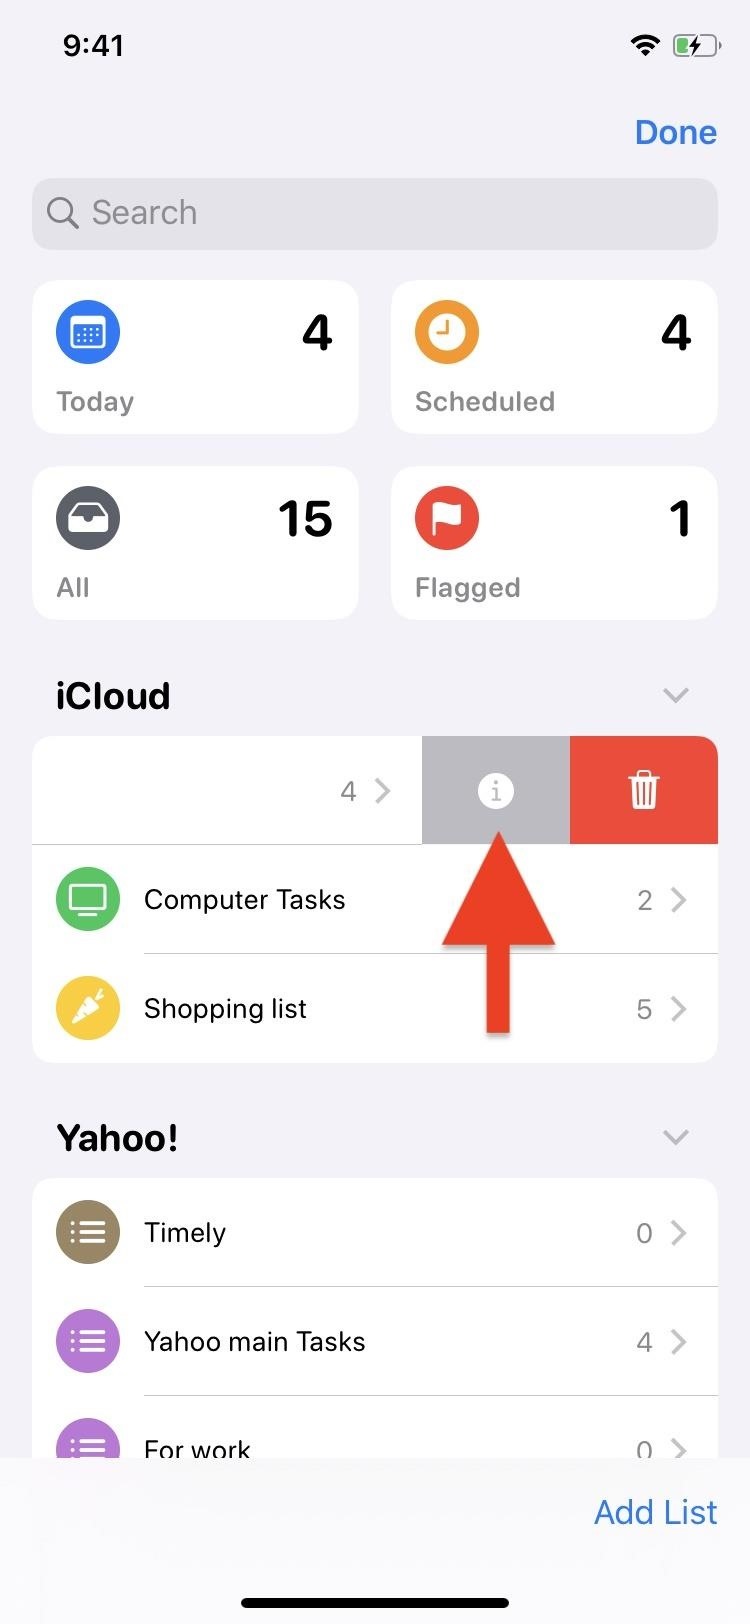 How to Create Grouped Lists in iOS 13's Reminders App to Keep Things More Organized